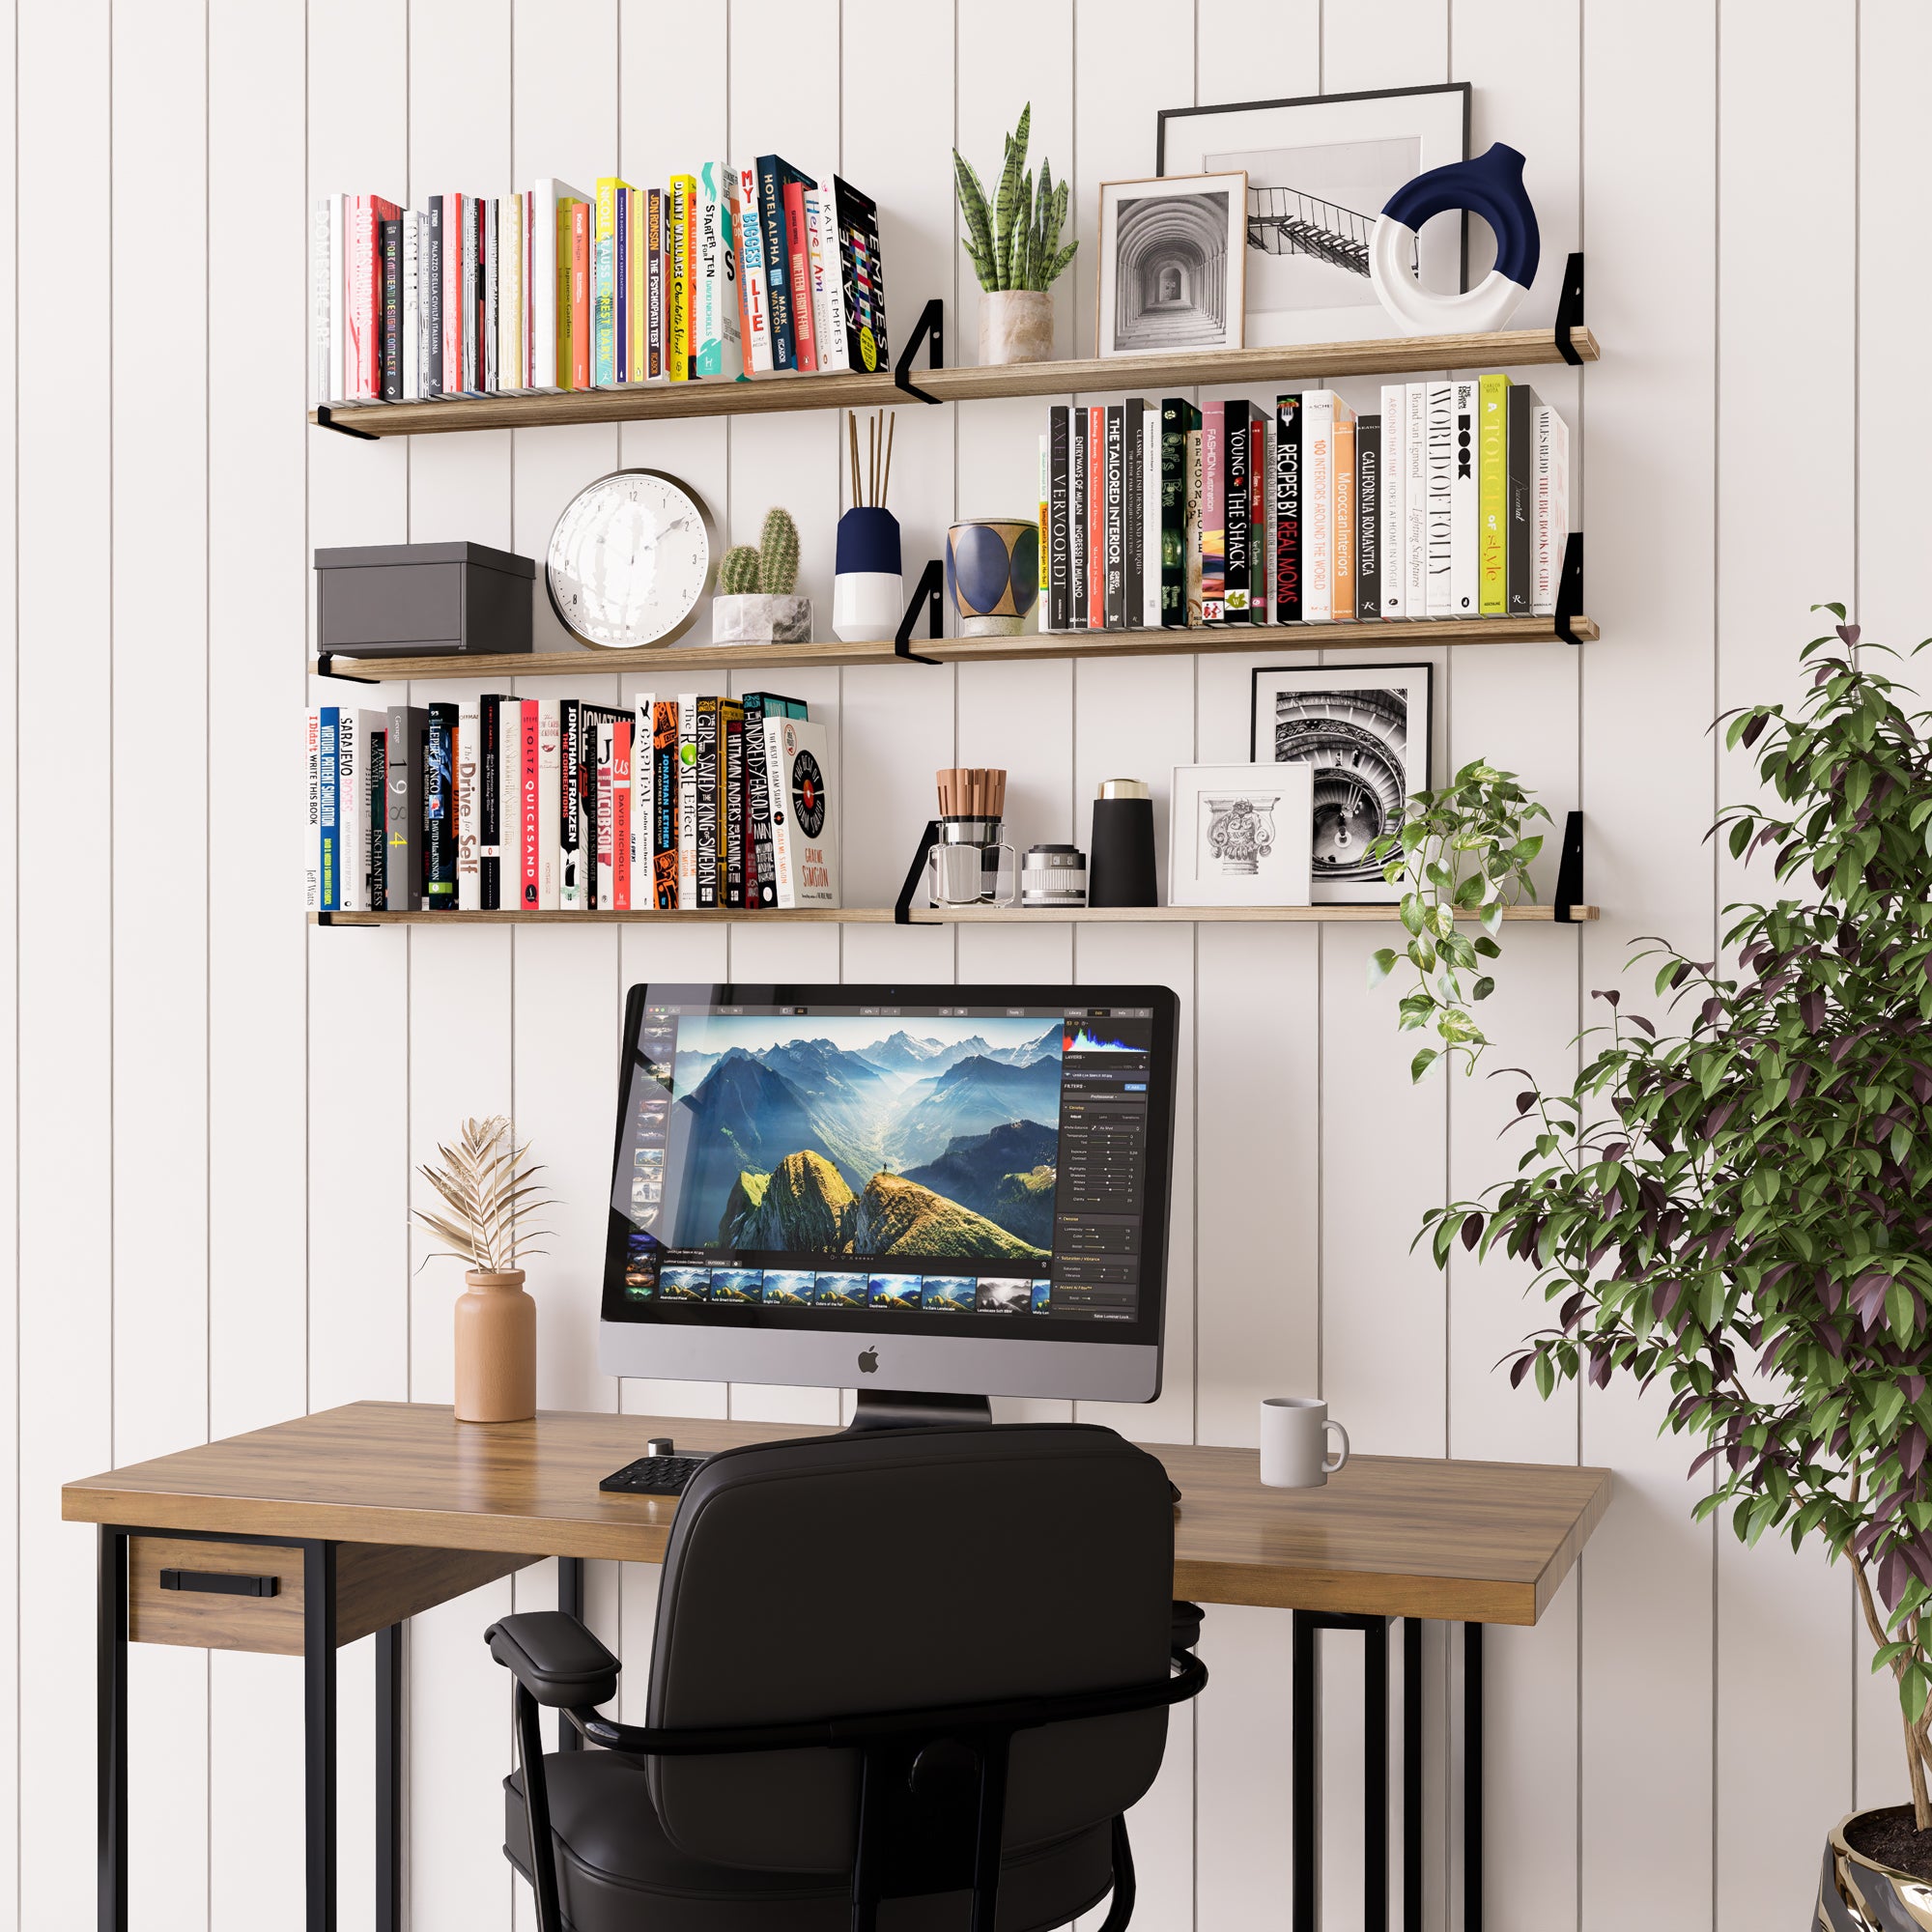 A home office space with burnt organizer shelves above a desk, neatly displaying books, plant decor, and personal items.